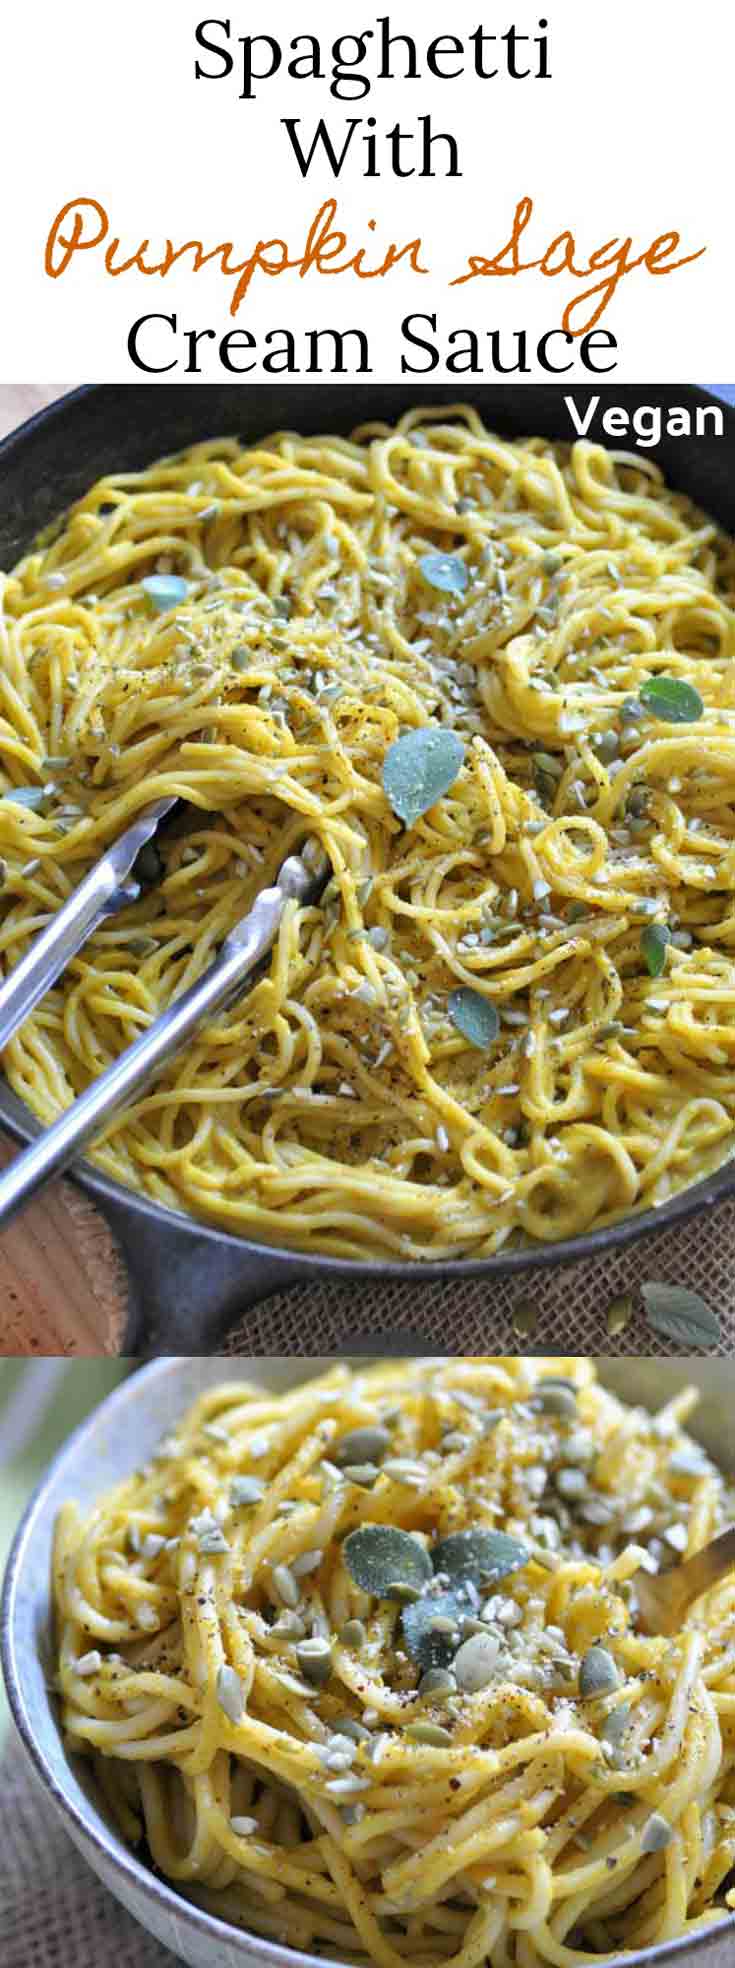 A quick and easy dinner that tastes like you'd get in a restaurant. Pumpkin Sage Cream Sauce with Spaghetti!